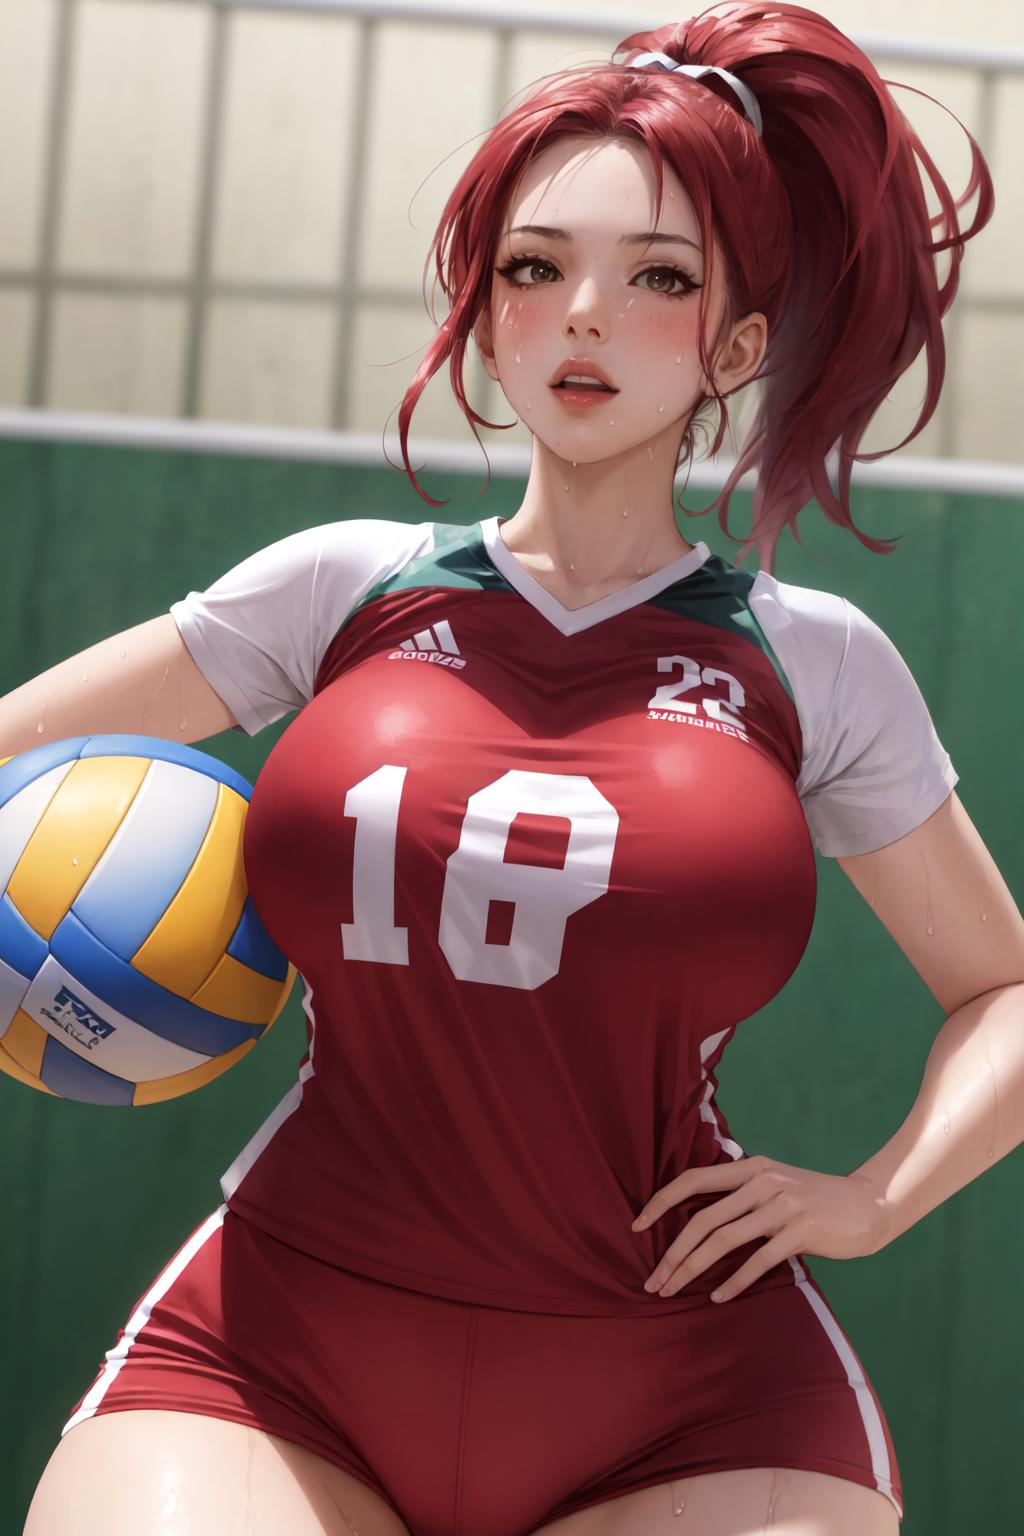 A 3D animated image of a volleyball player wearing a red and white shirt, holding a volleyball with the number 18 on it.